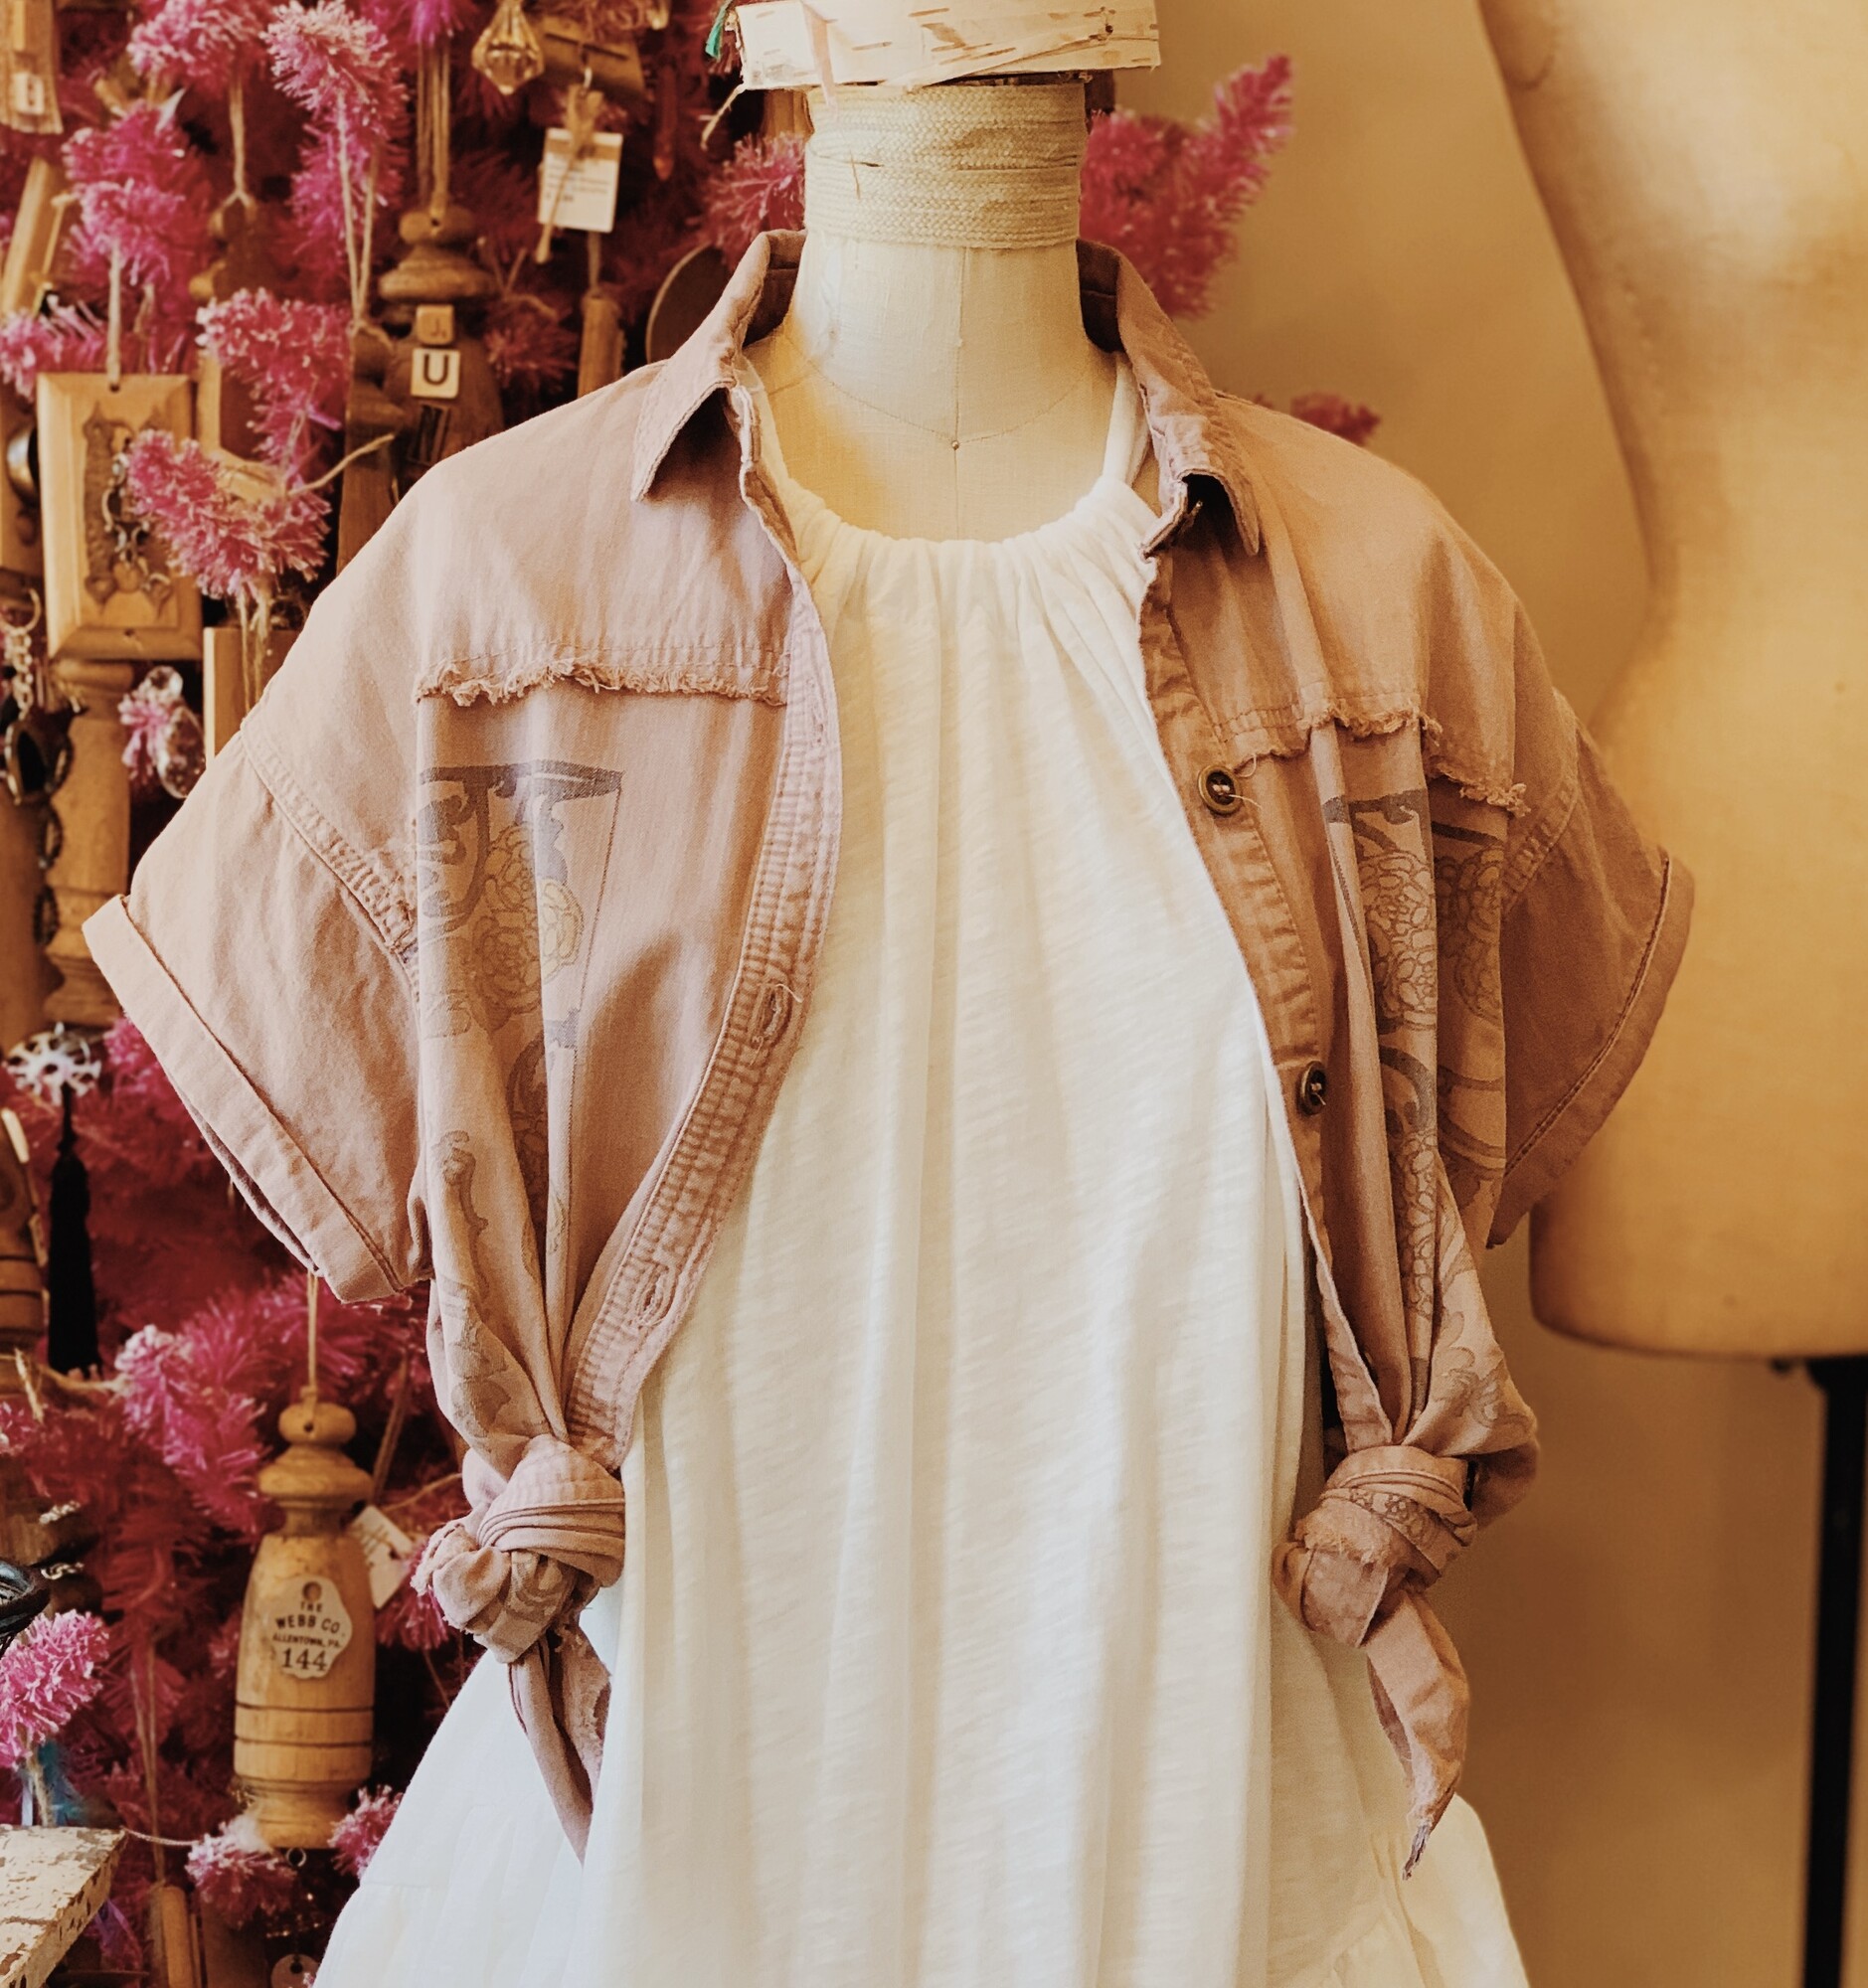 This gorgeous mauve shirt is madeof a denim material and has a lovely floral pattern on the front!